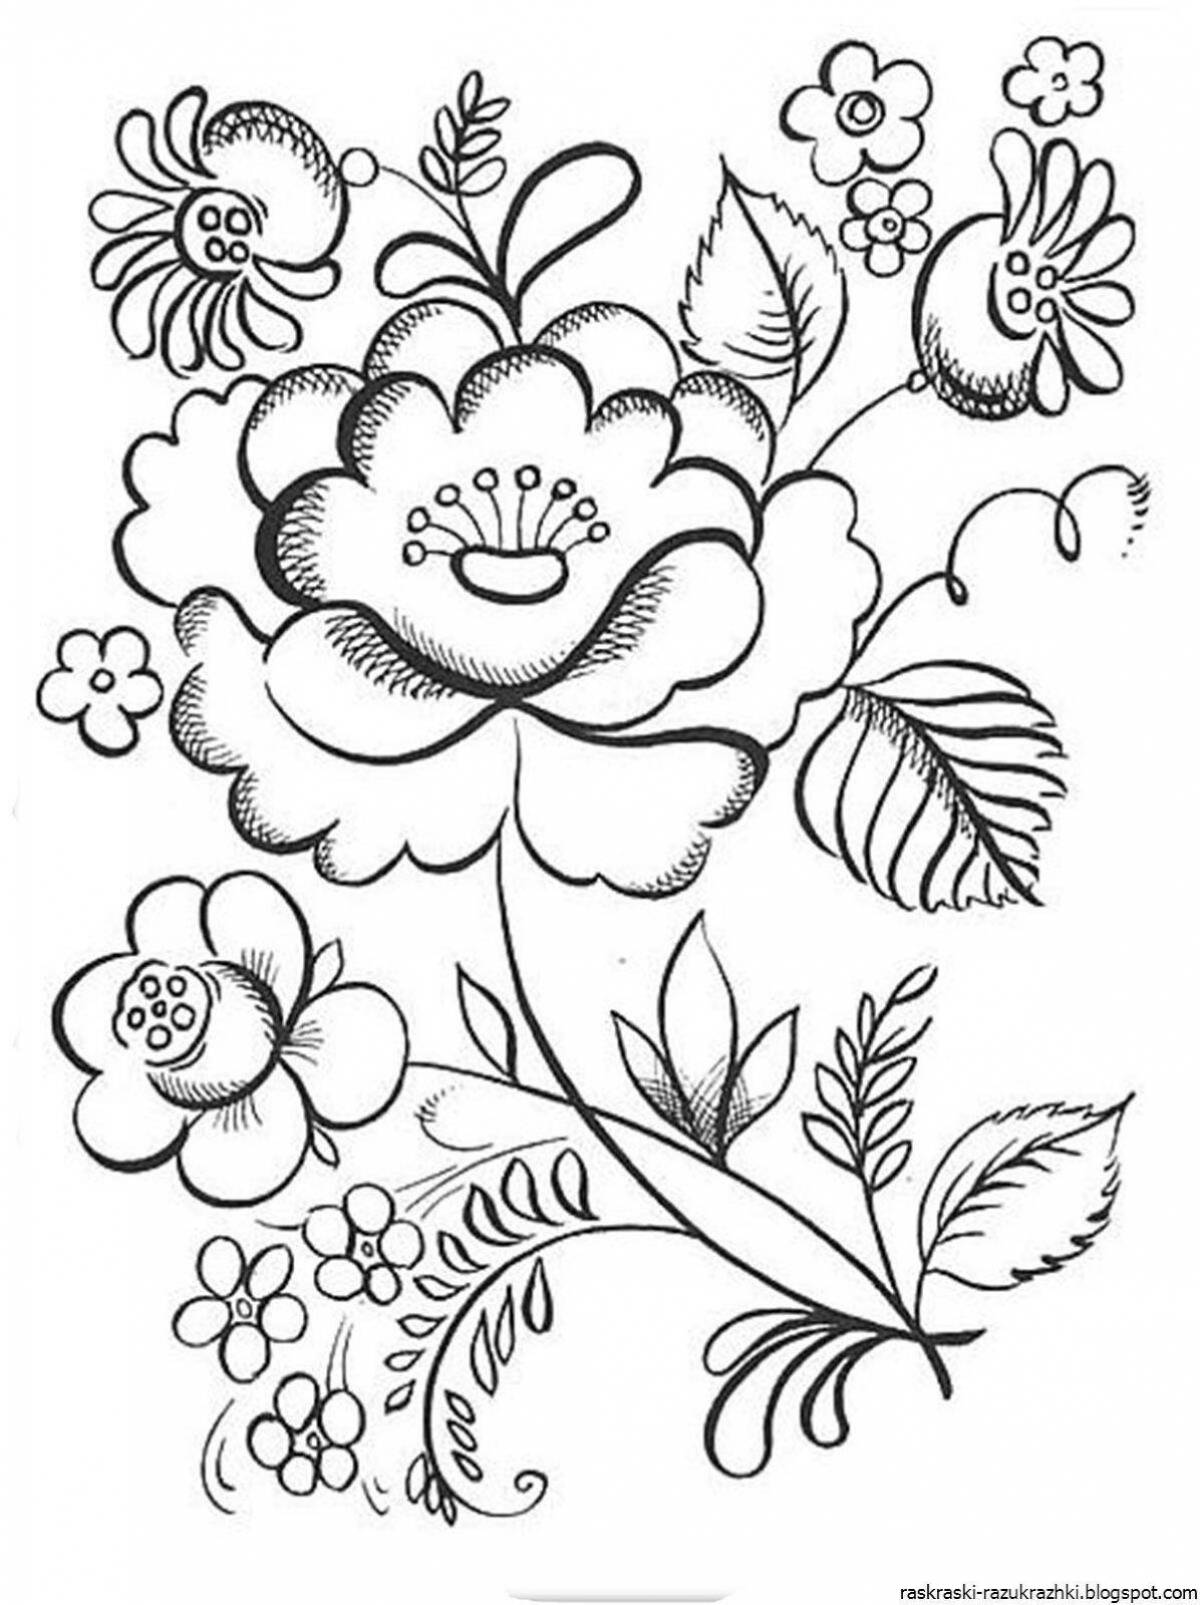 Coloring page charming Zhostovo flowers